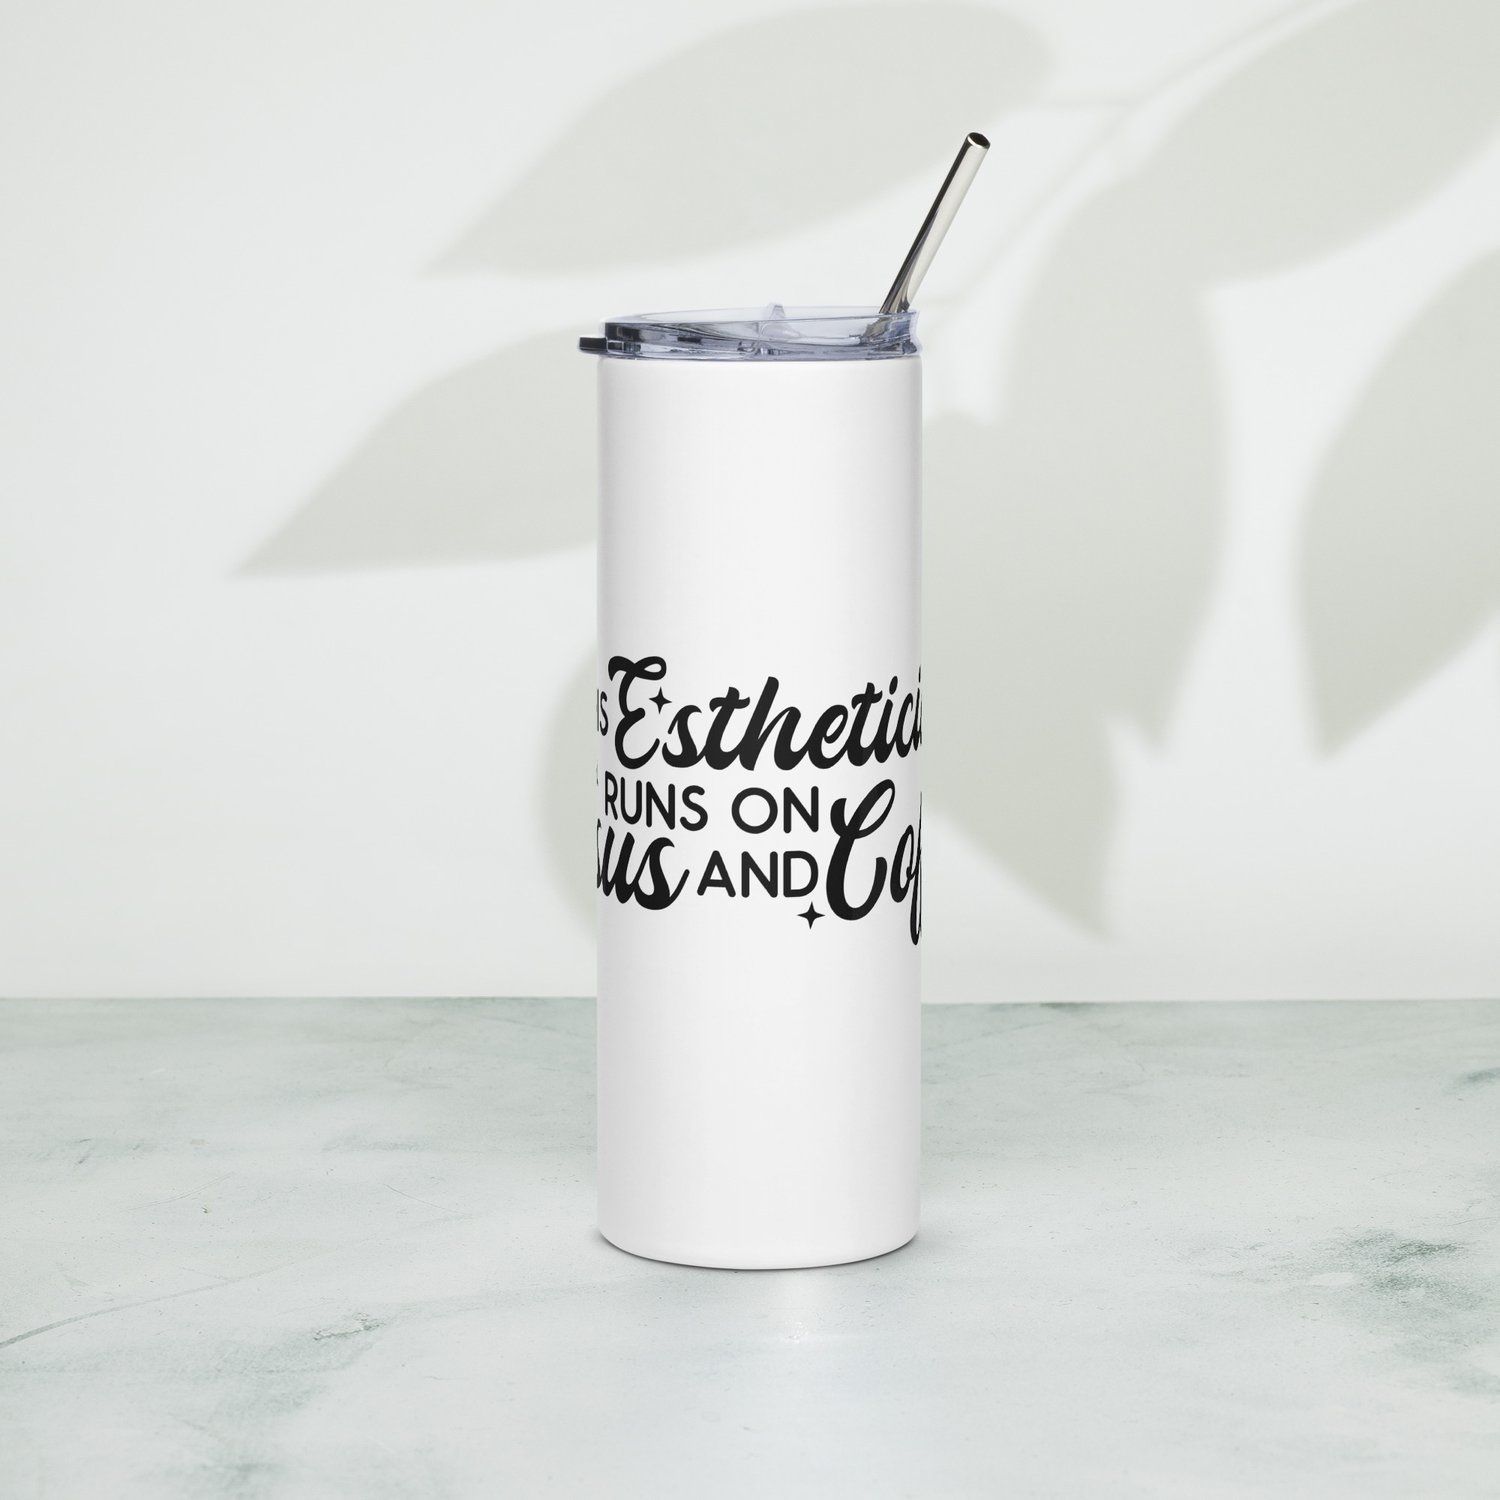 https://images.squarespace-cdn.com/content/v1/5d5eb29f7c35a60001dd344c/1671528330602-2IHYSSMEHJ82GWL5YVMA/stainless-steel-tumbler-white-front-63a17f7e3a50a.jpg?format=1500w